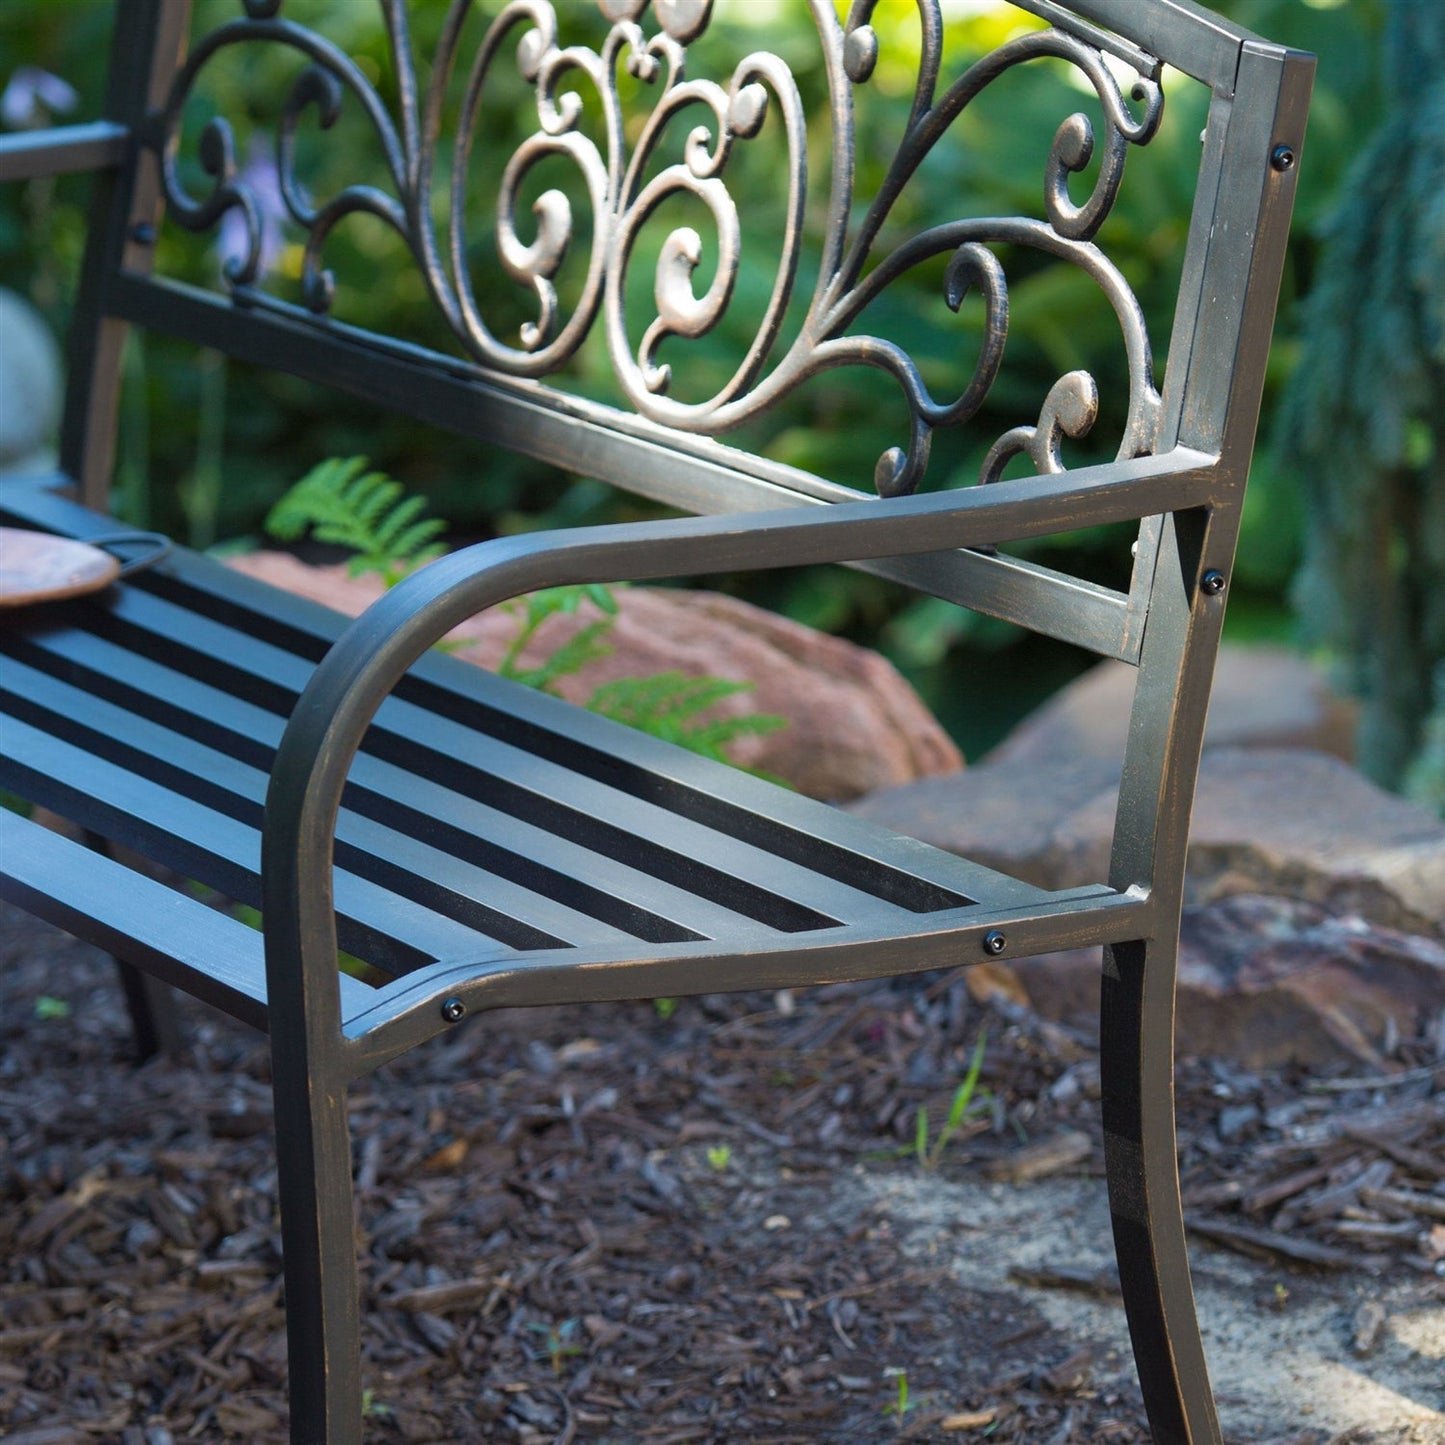 Outdoor > Outdoor Furniture > Garden Benches - Curved Metal Garden Bench With Heart Pattern In Black Antique Bronze Finish